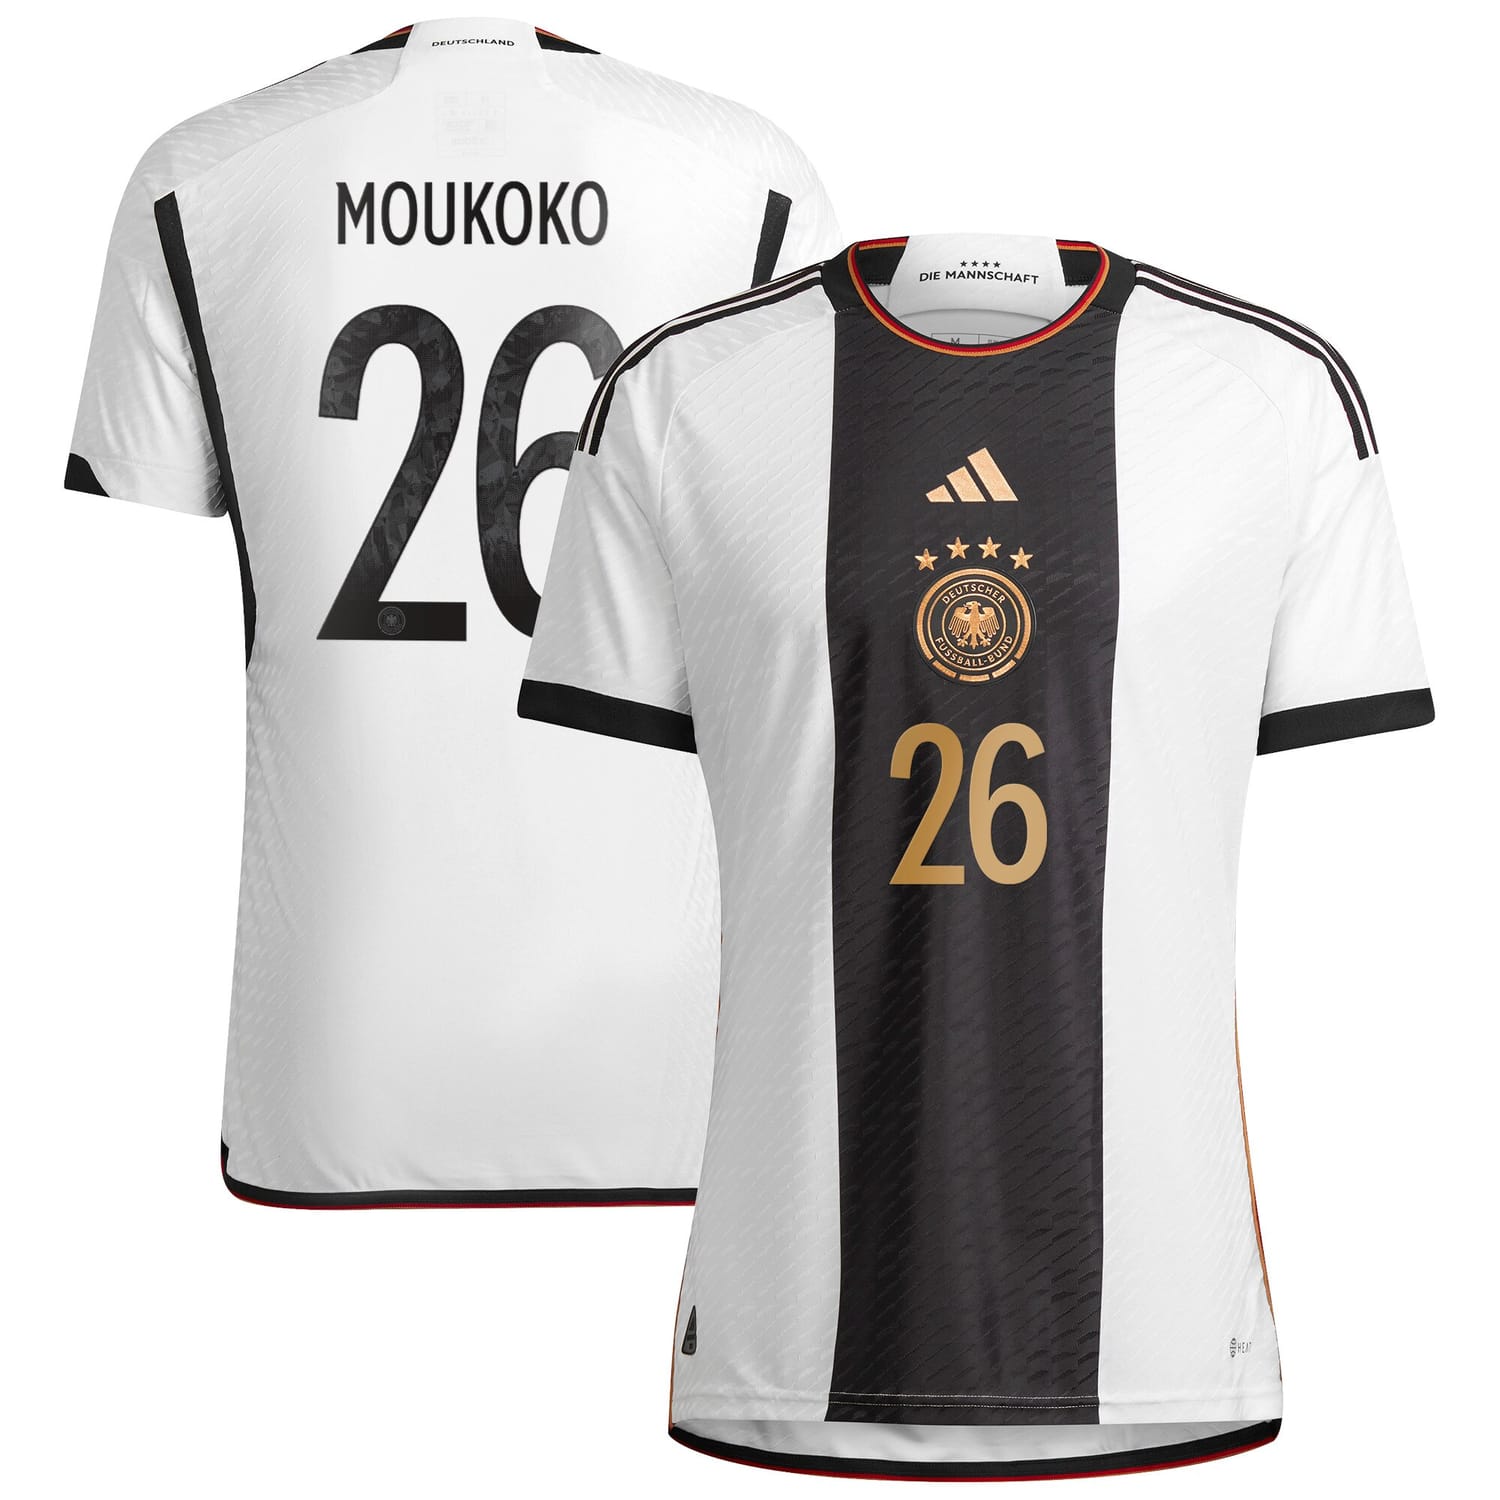 Germany National Team Home Authentic Jersey Shirt 2022 player Youssoufa Moukoko 26 printing for Men